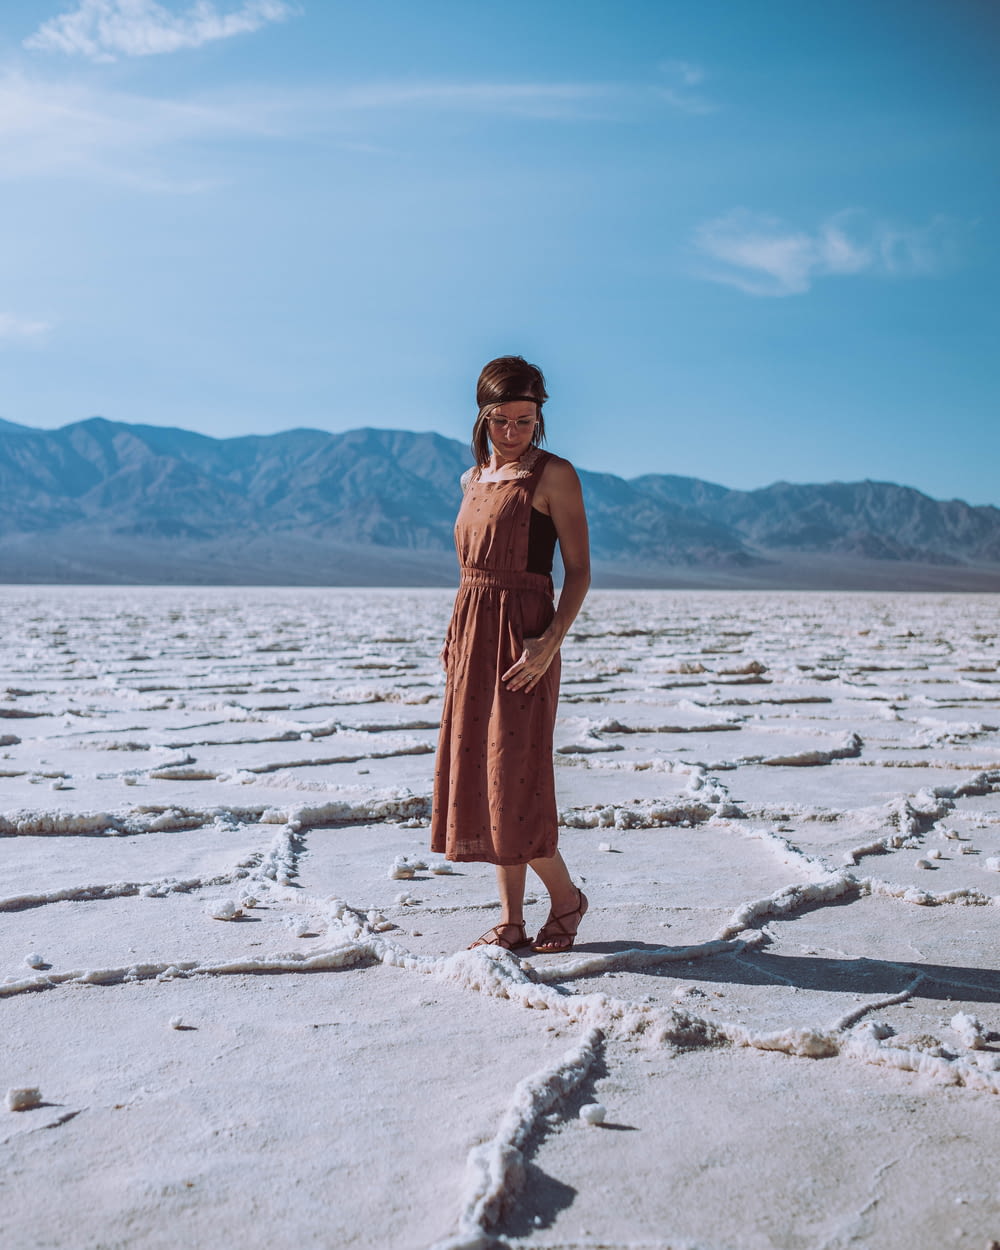 woman wearing brown dress standing on icy surface